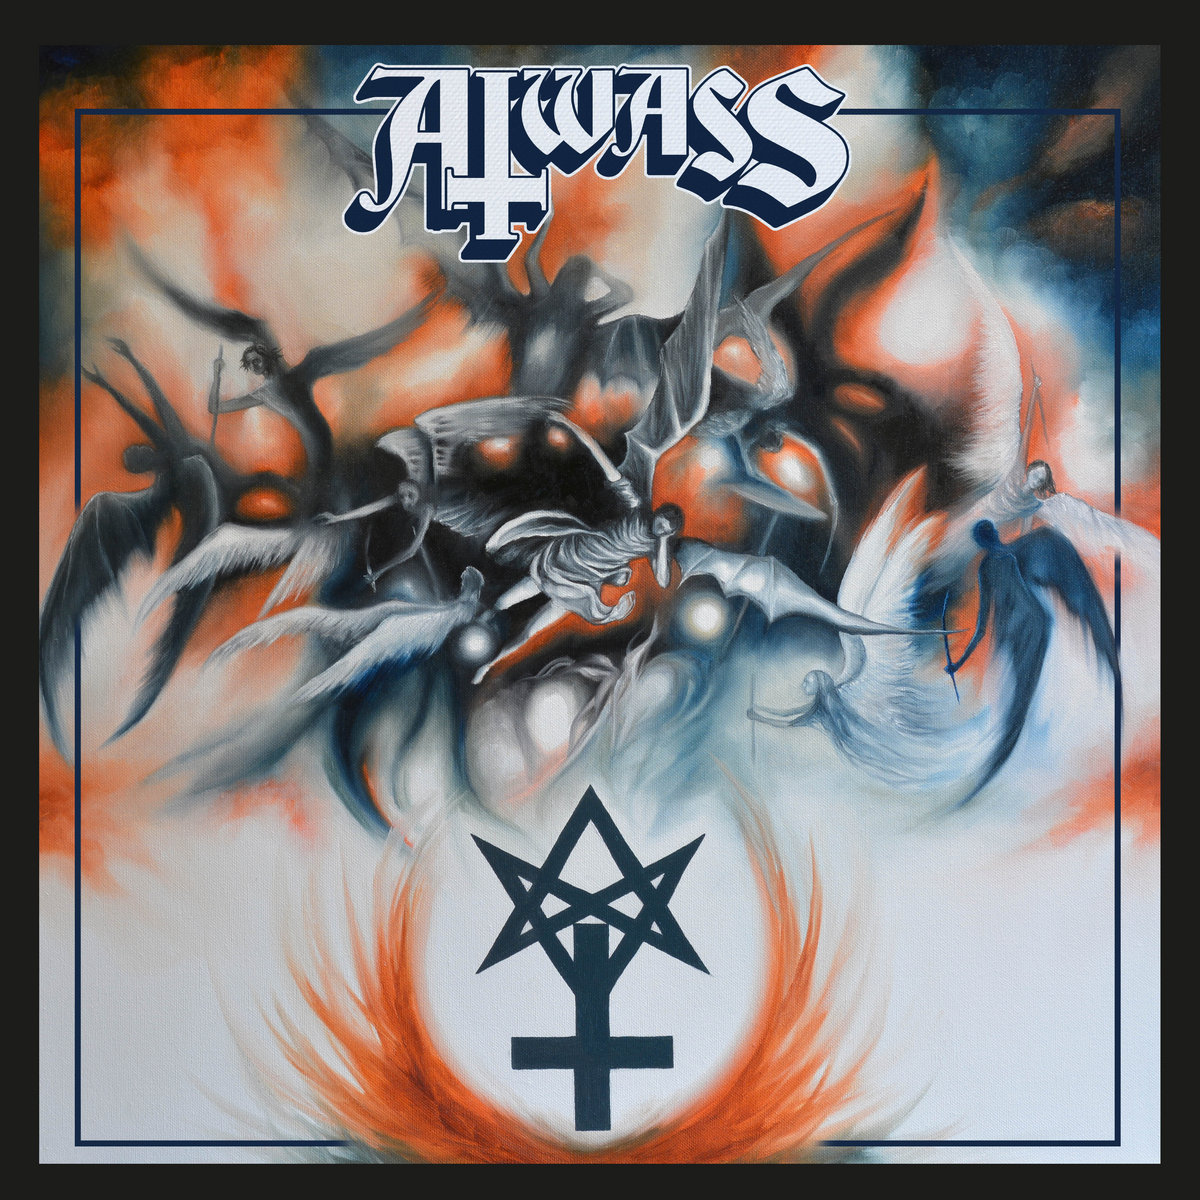 ALBUM REVIEW: The Falling by Aiwass